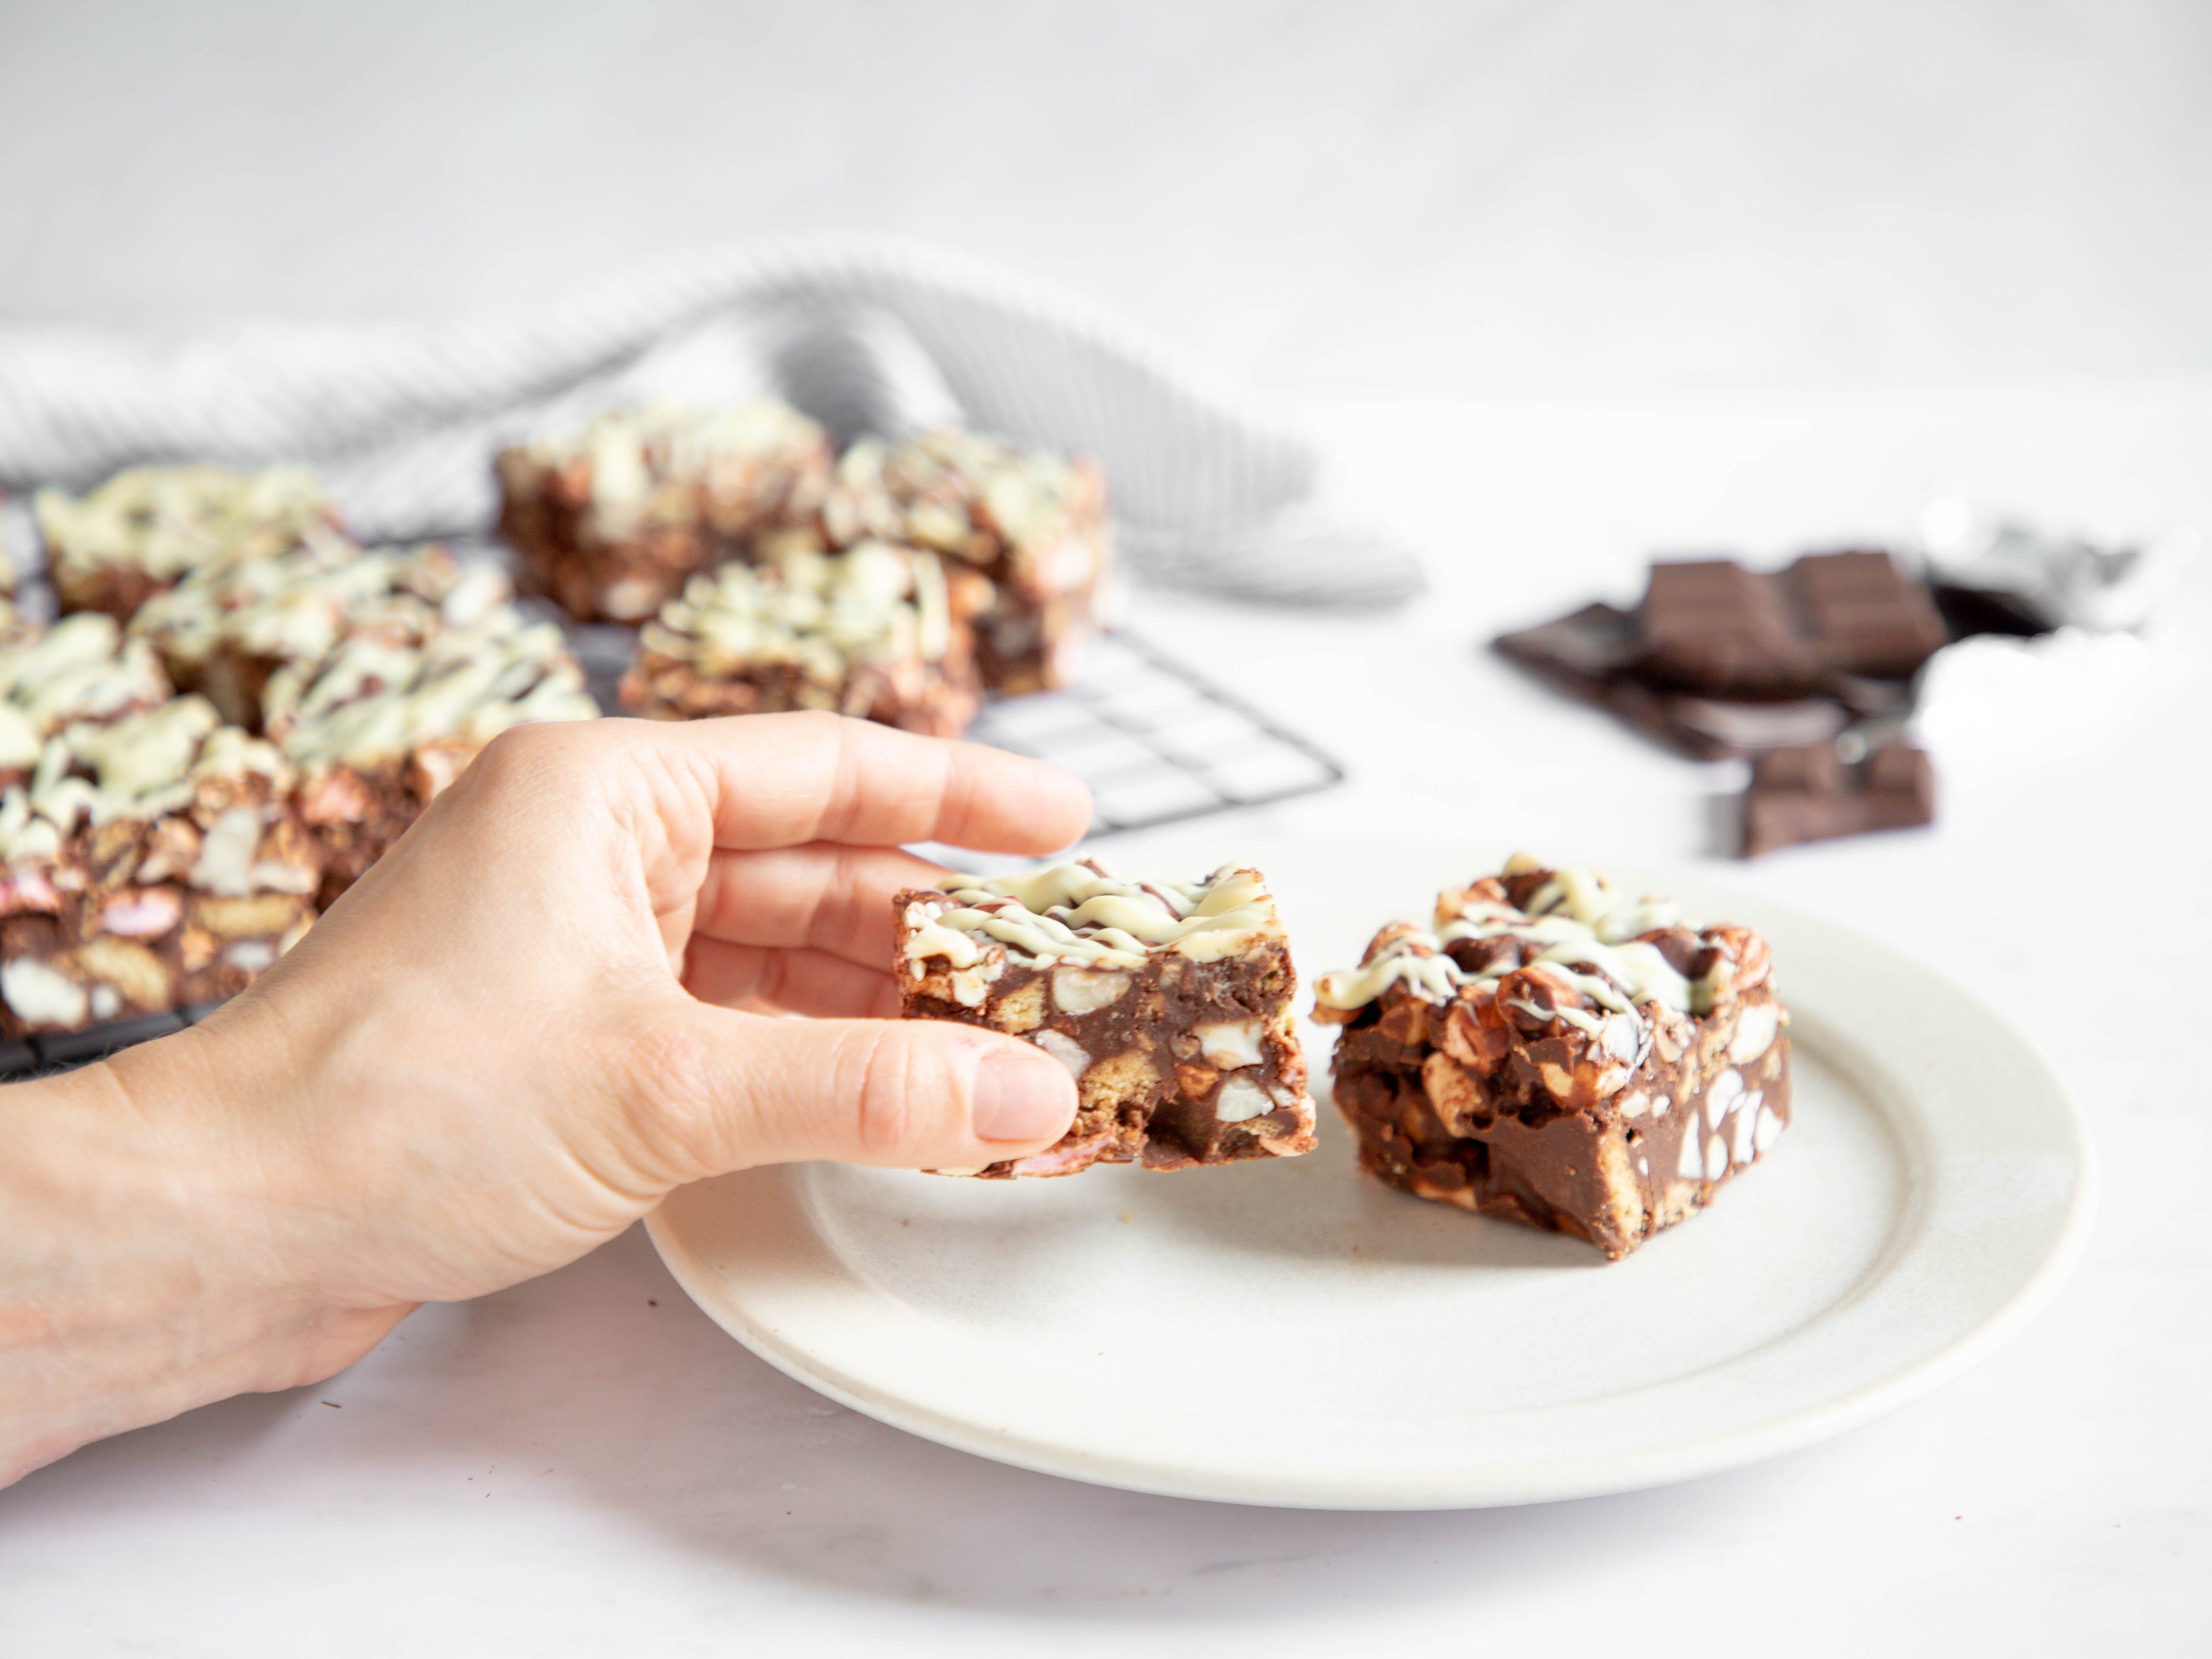 Hand reaching in to take a slice of rocky road from a white plate. More squares of rocky road on a cooling rack in the background along with some chocolate chunks